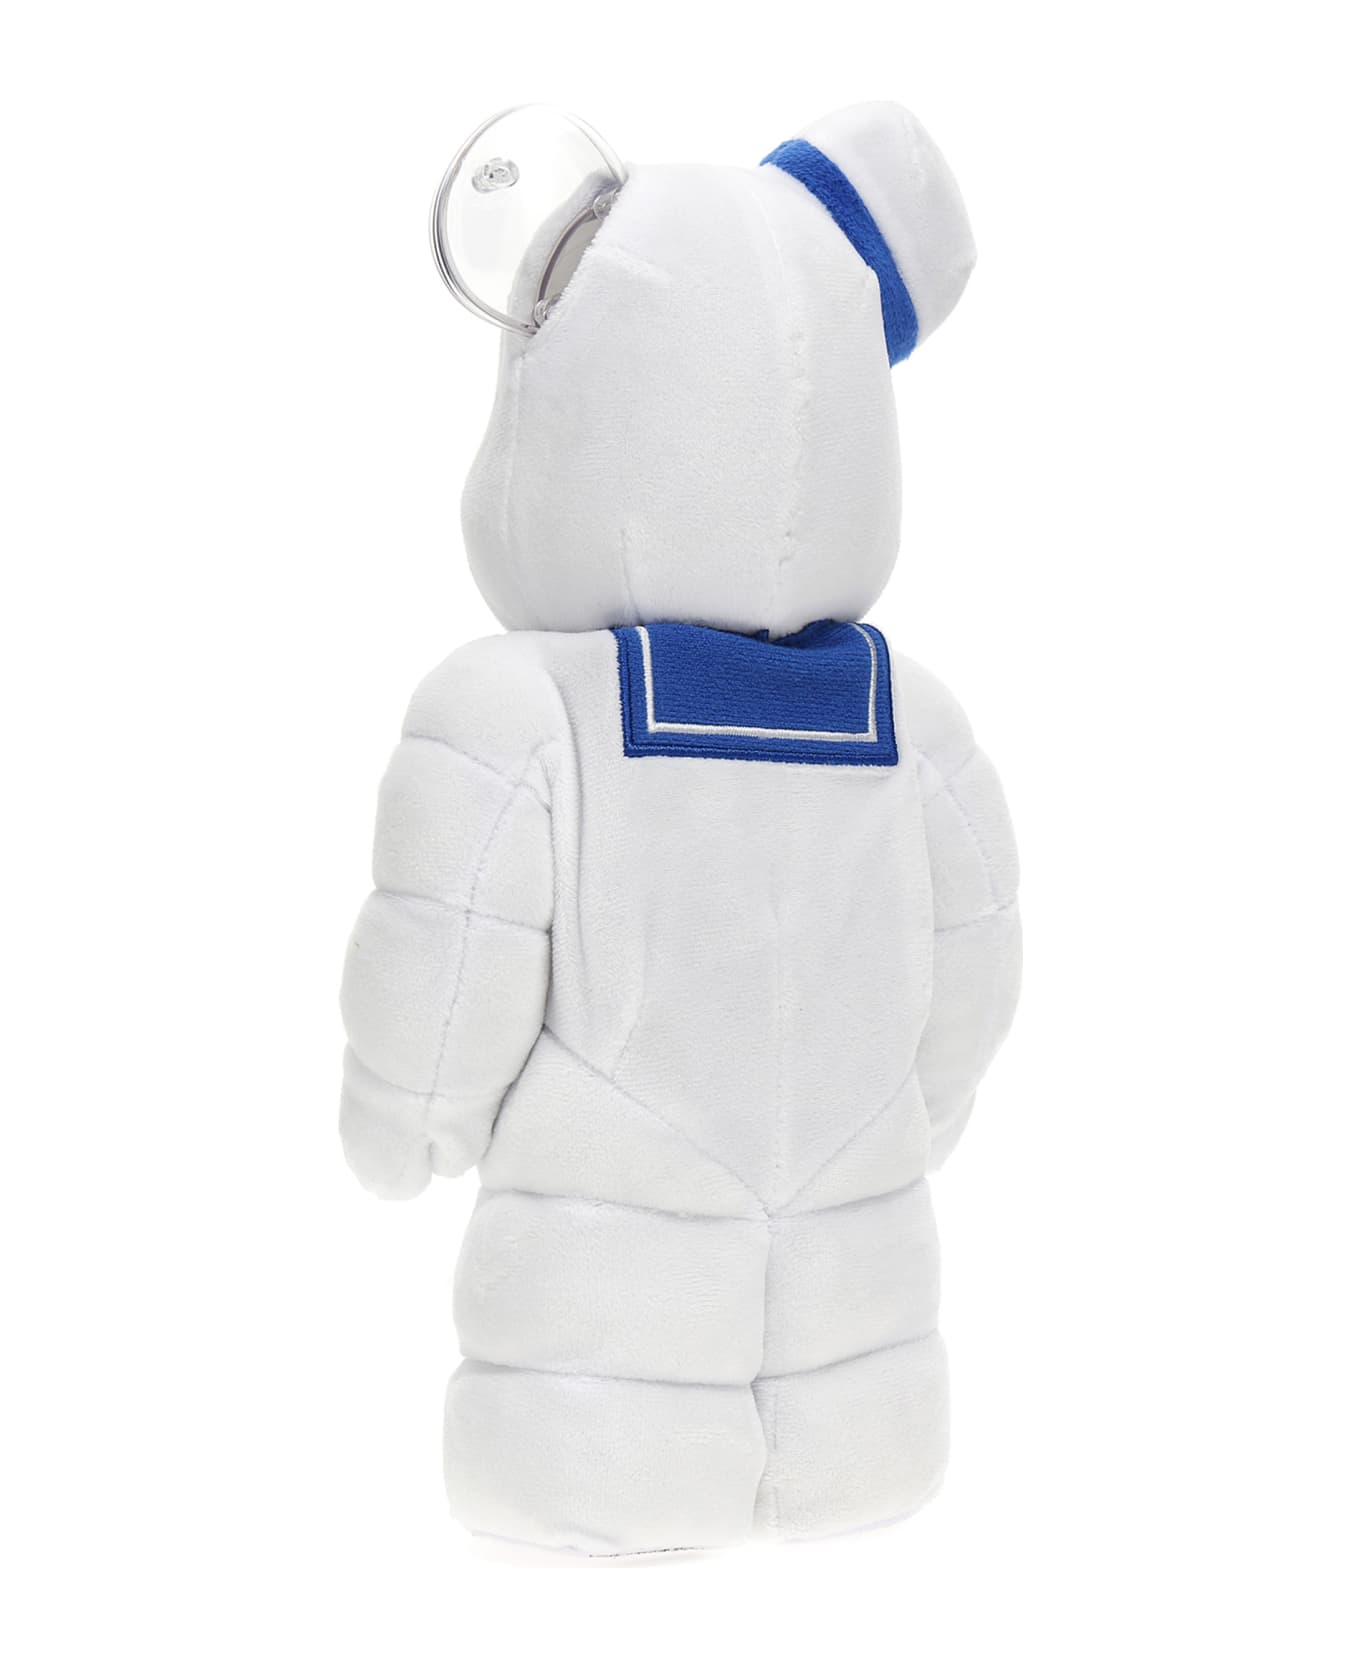 Medicom Toy Be@rbrick 100% And 400% Ghostbusters Stay Puft Marshmallow Man - Multicolor